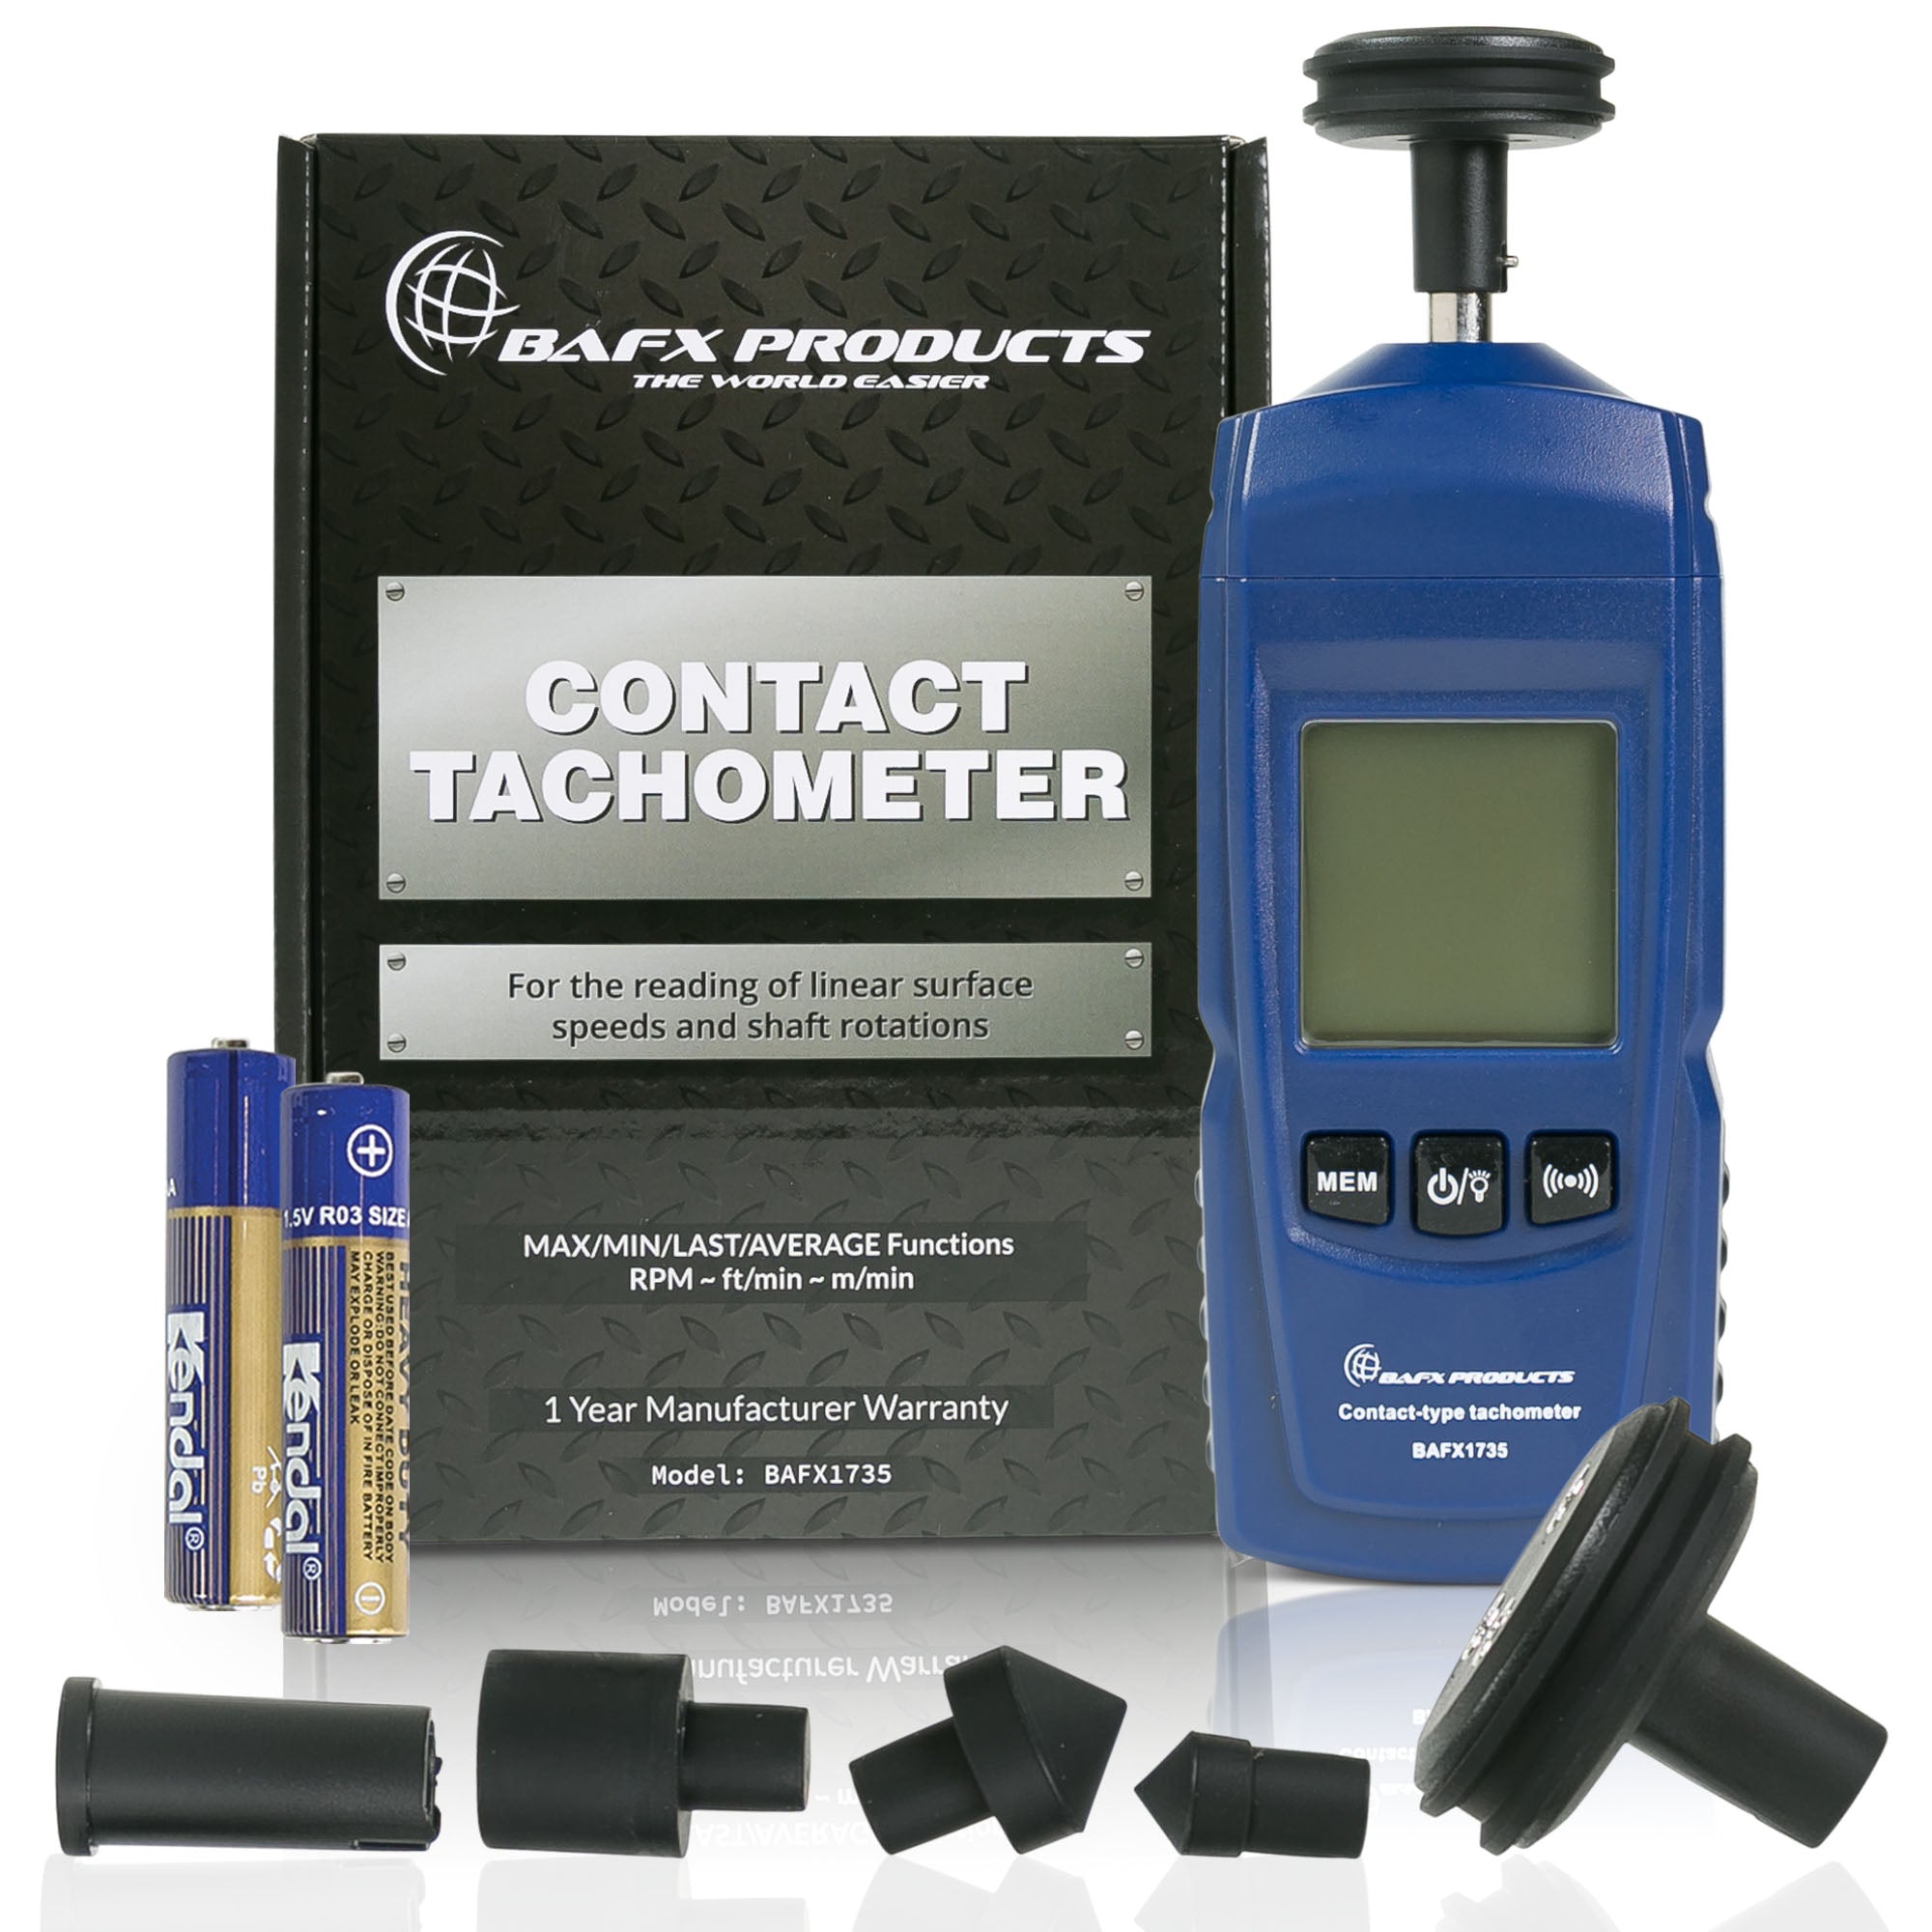 Contact Tachometer for Linear and Rotational RPM Readings